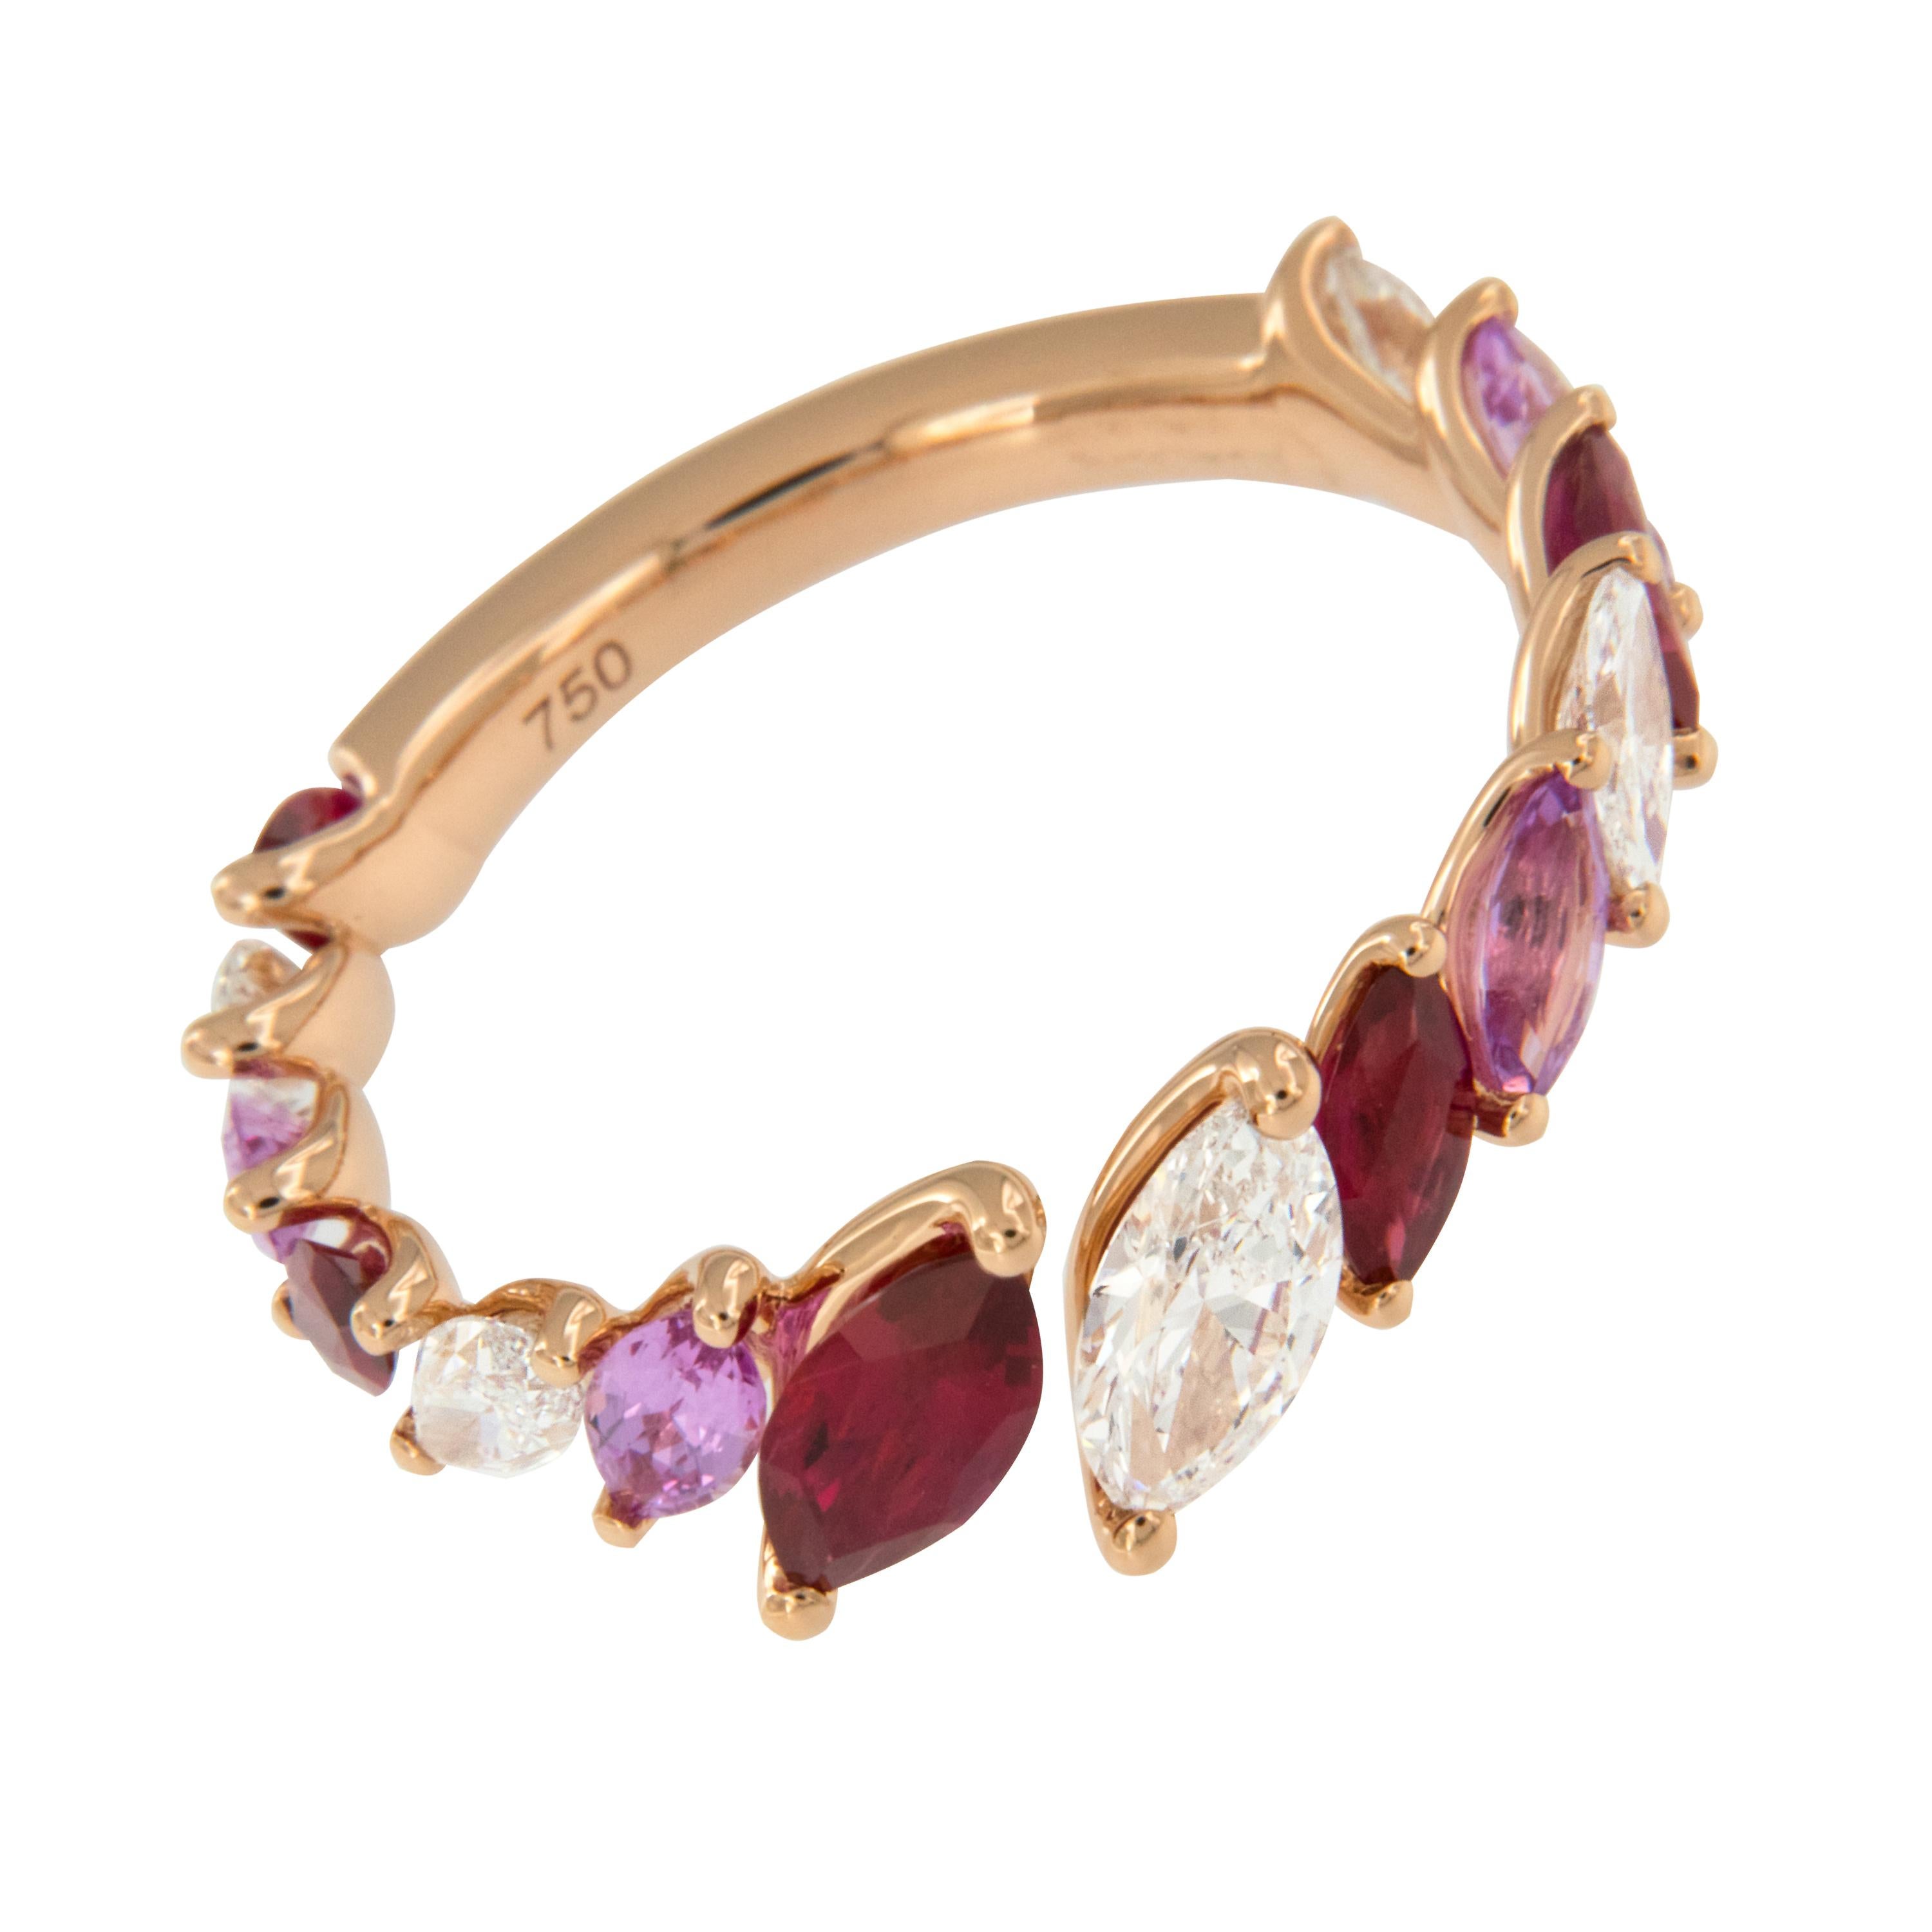 You will be tickled pink with this gorgeous and unique ring! Crafted in 18 karat rose gold with unique, open top bypass style and showcasing the complimetary colors of 5 marquise diamonds = 0.765 Cttw, 5 rubies = 0.93 Cttw & 4 pink sapphires = 0.62